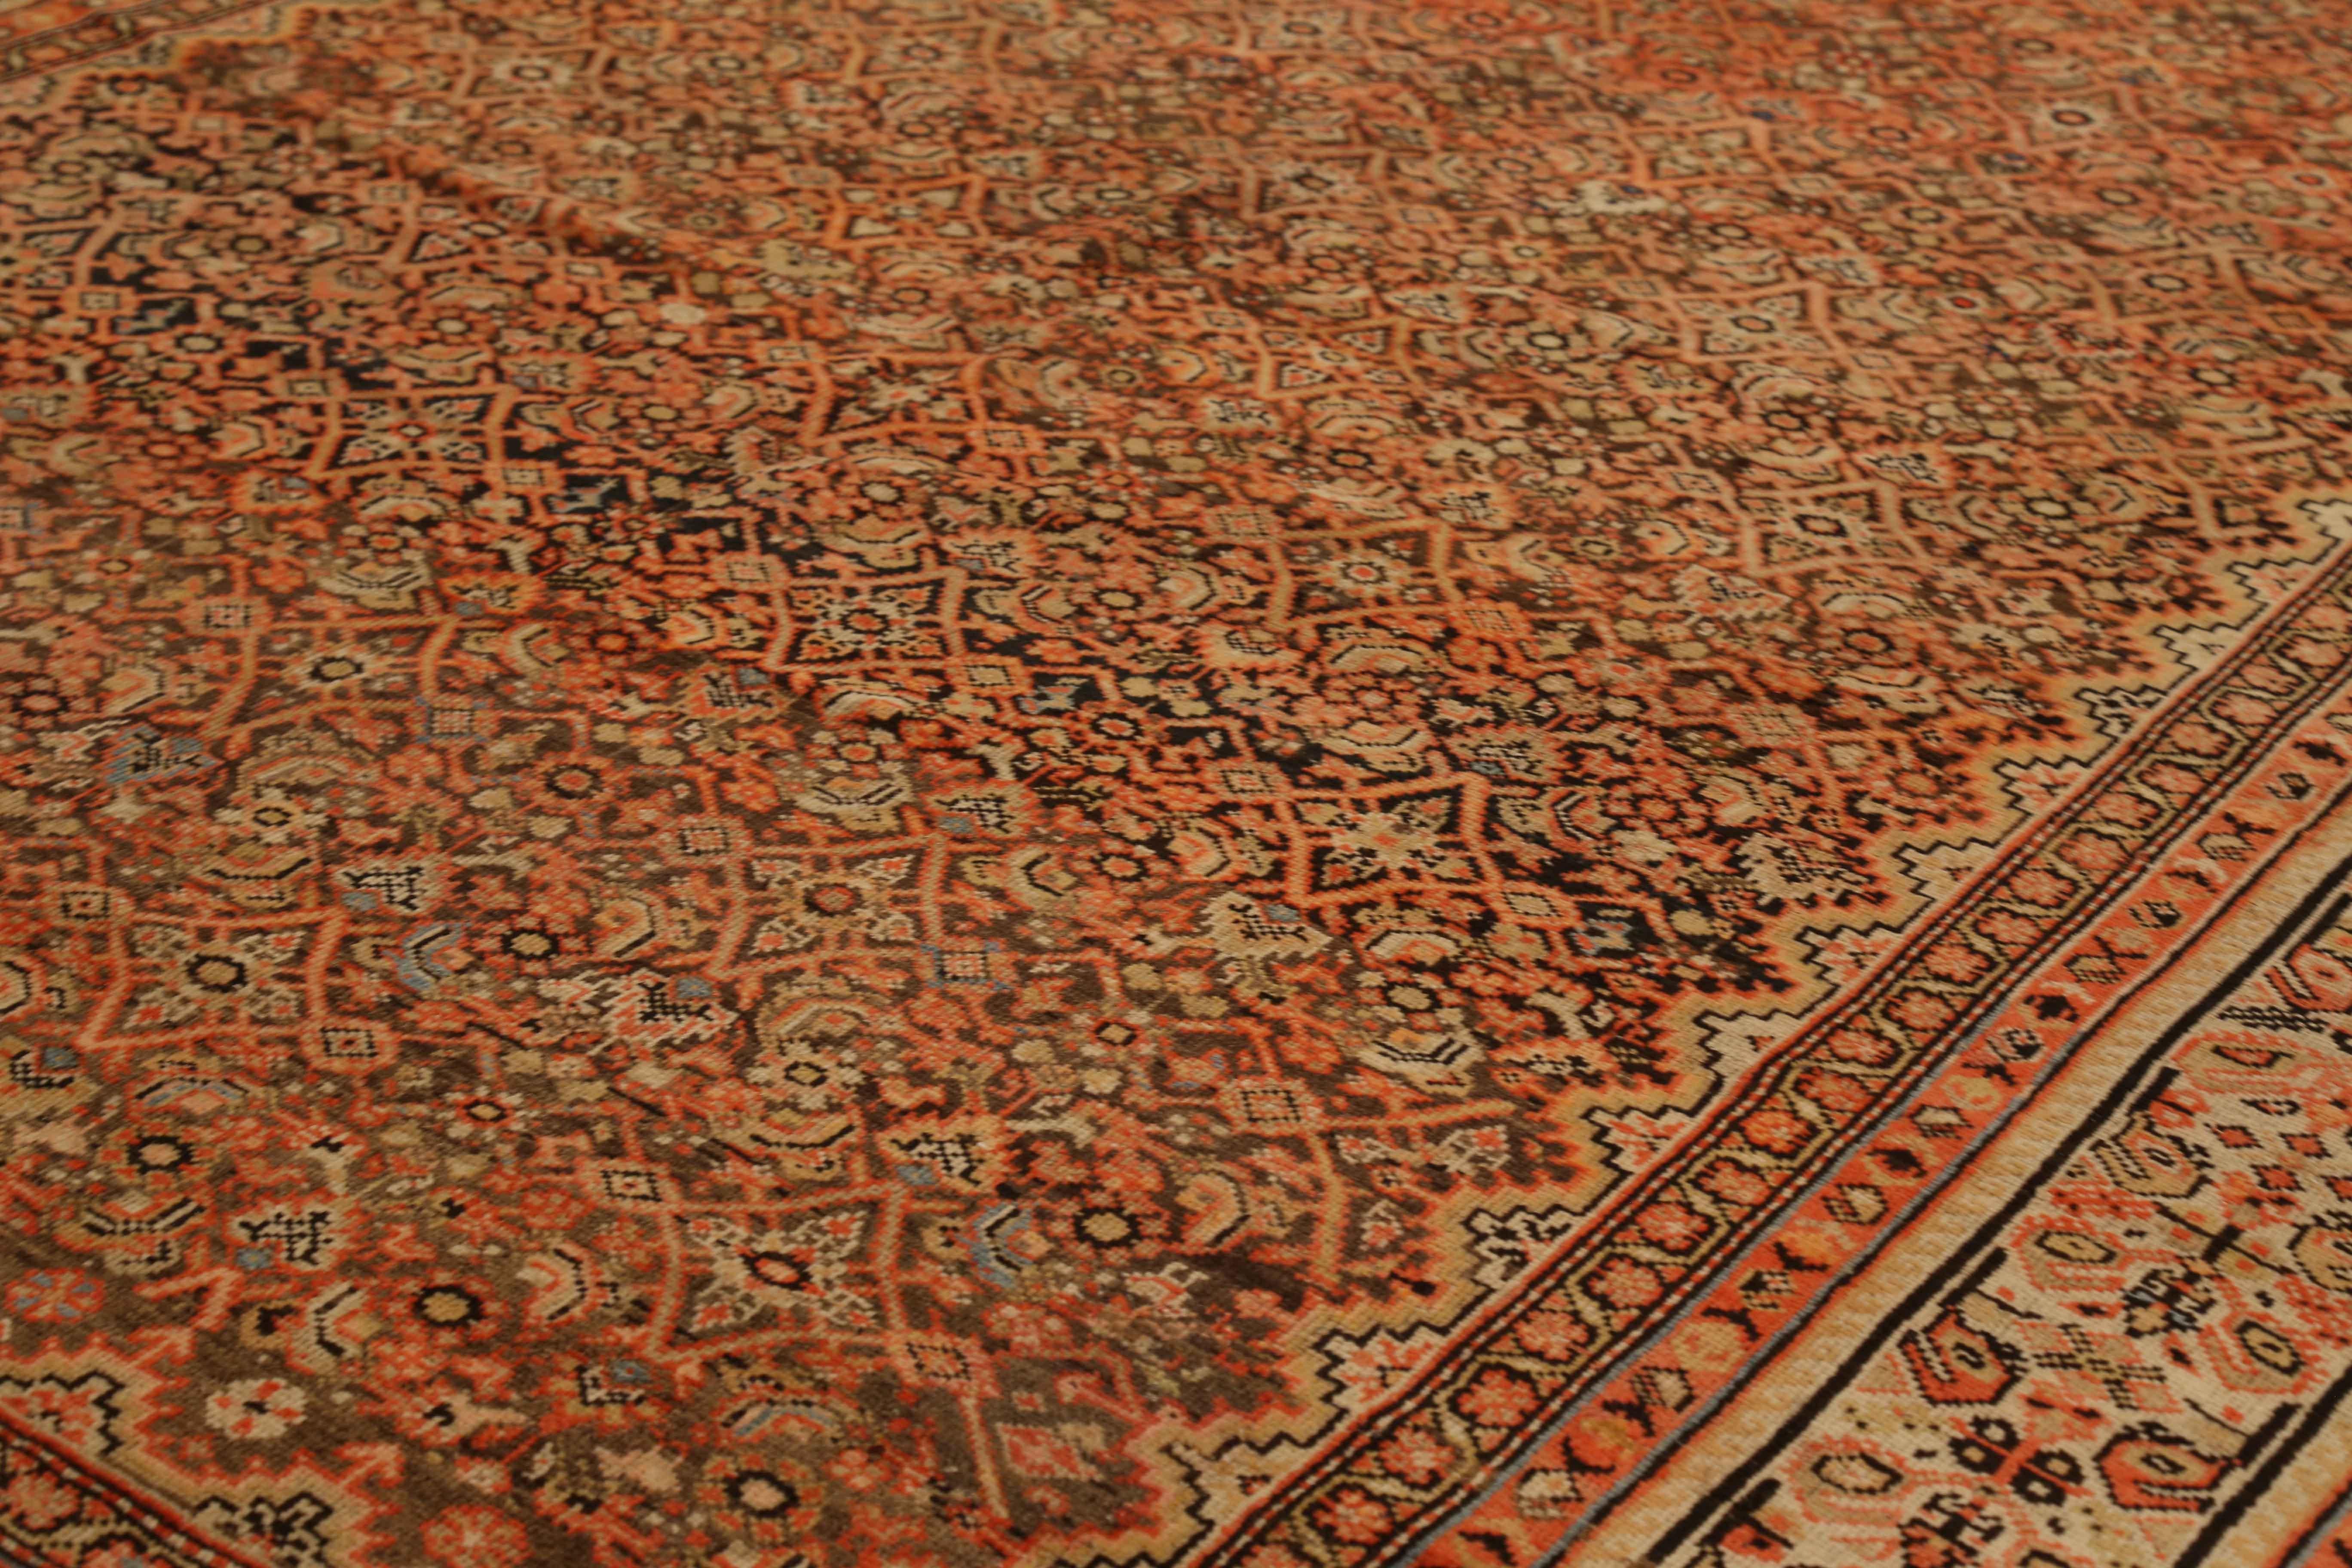 Other Antique Persian Rug Malayer Style with Ornate Stars & Flowers Pattern circa 1930 For Sale